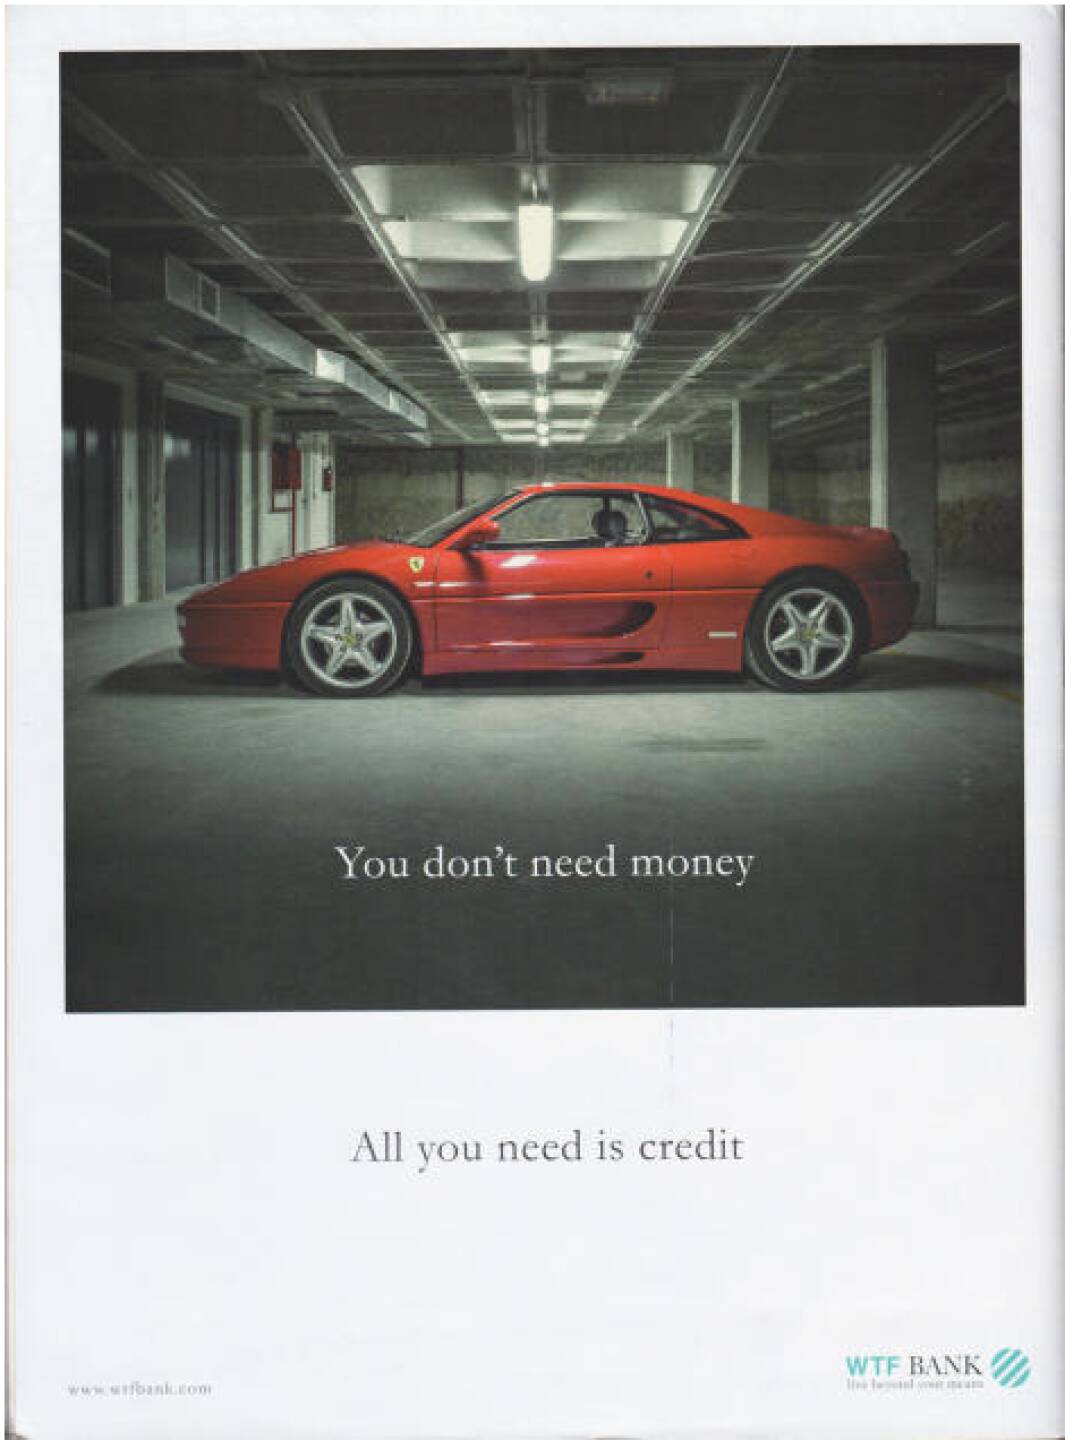 All you need is credit - WTF Bank, The Pigs, (c) Carlos Spottorno (Phree und RM Verlag)